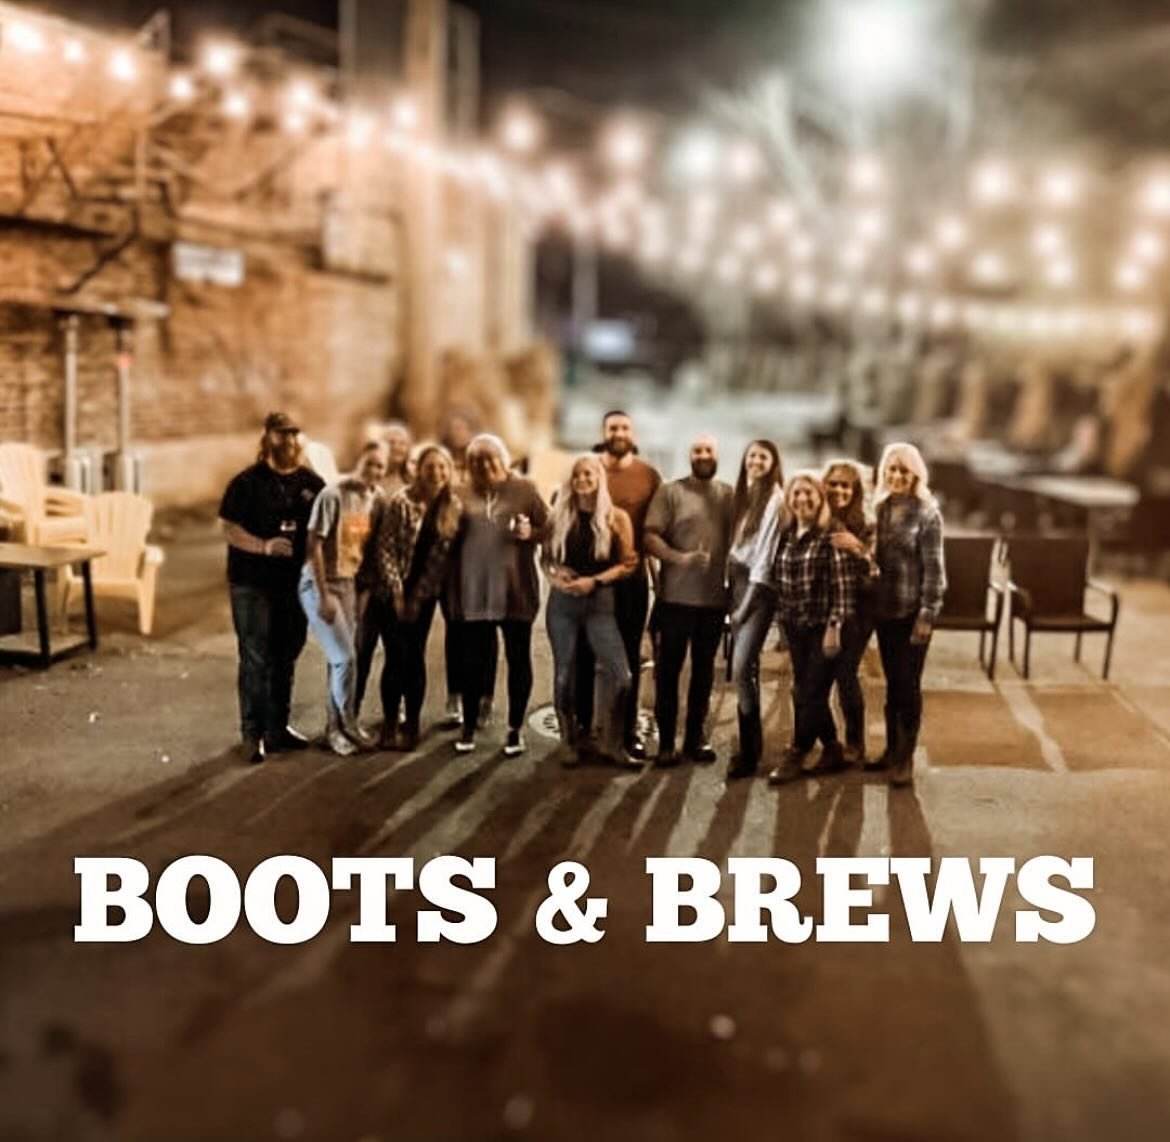 Happy Friday Beerlington! 

Boots &amp; Brews starts at 7:00!!
7:00 : Boot Scootin&rsquo; Boogie 
8:00: Achy Breaky Heart 

One class + One Pint (or NA beverage) = $20
Or add a second class for just $10 more! 

$30 gets you both classes and a beverag